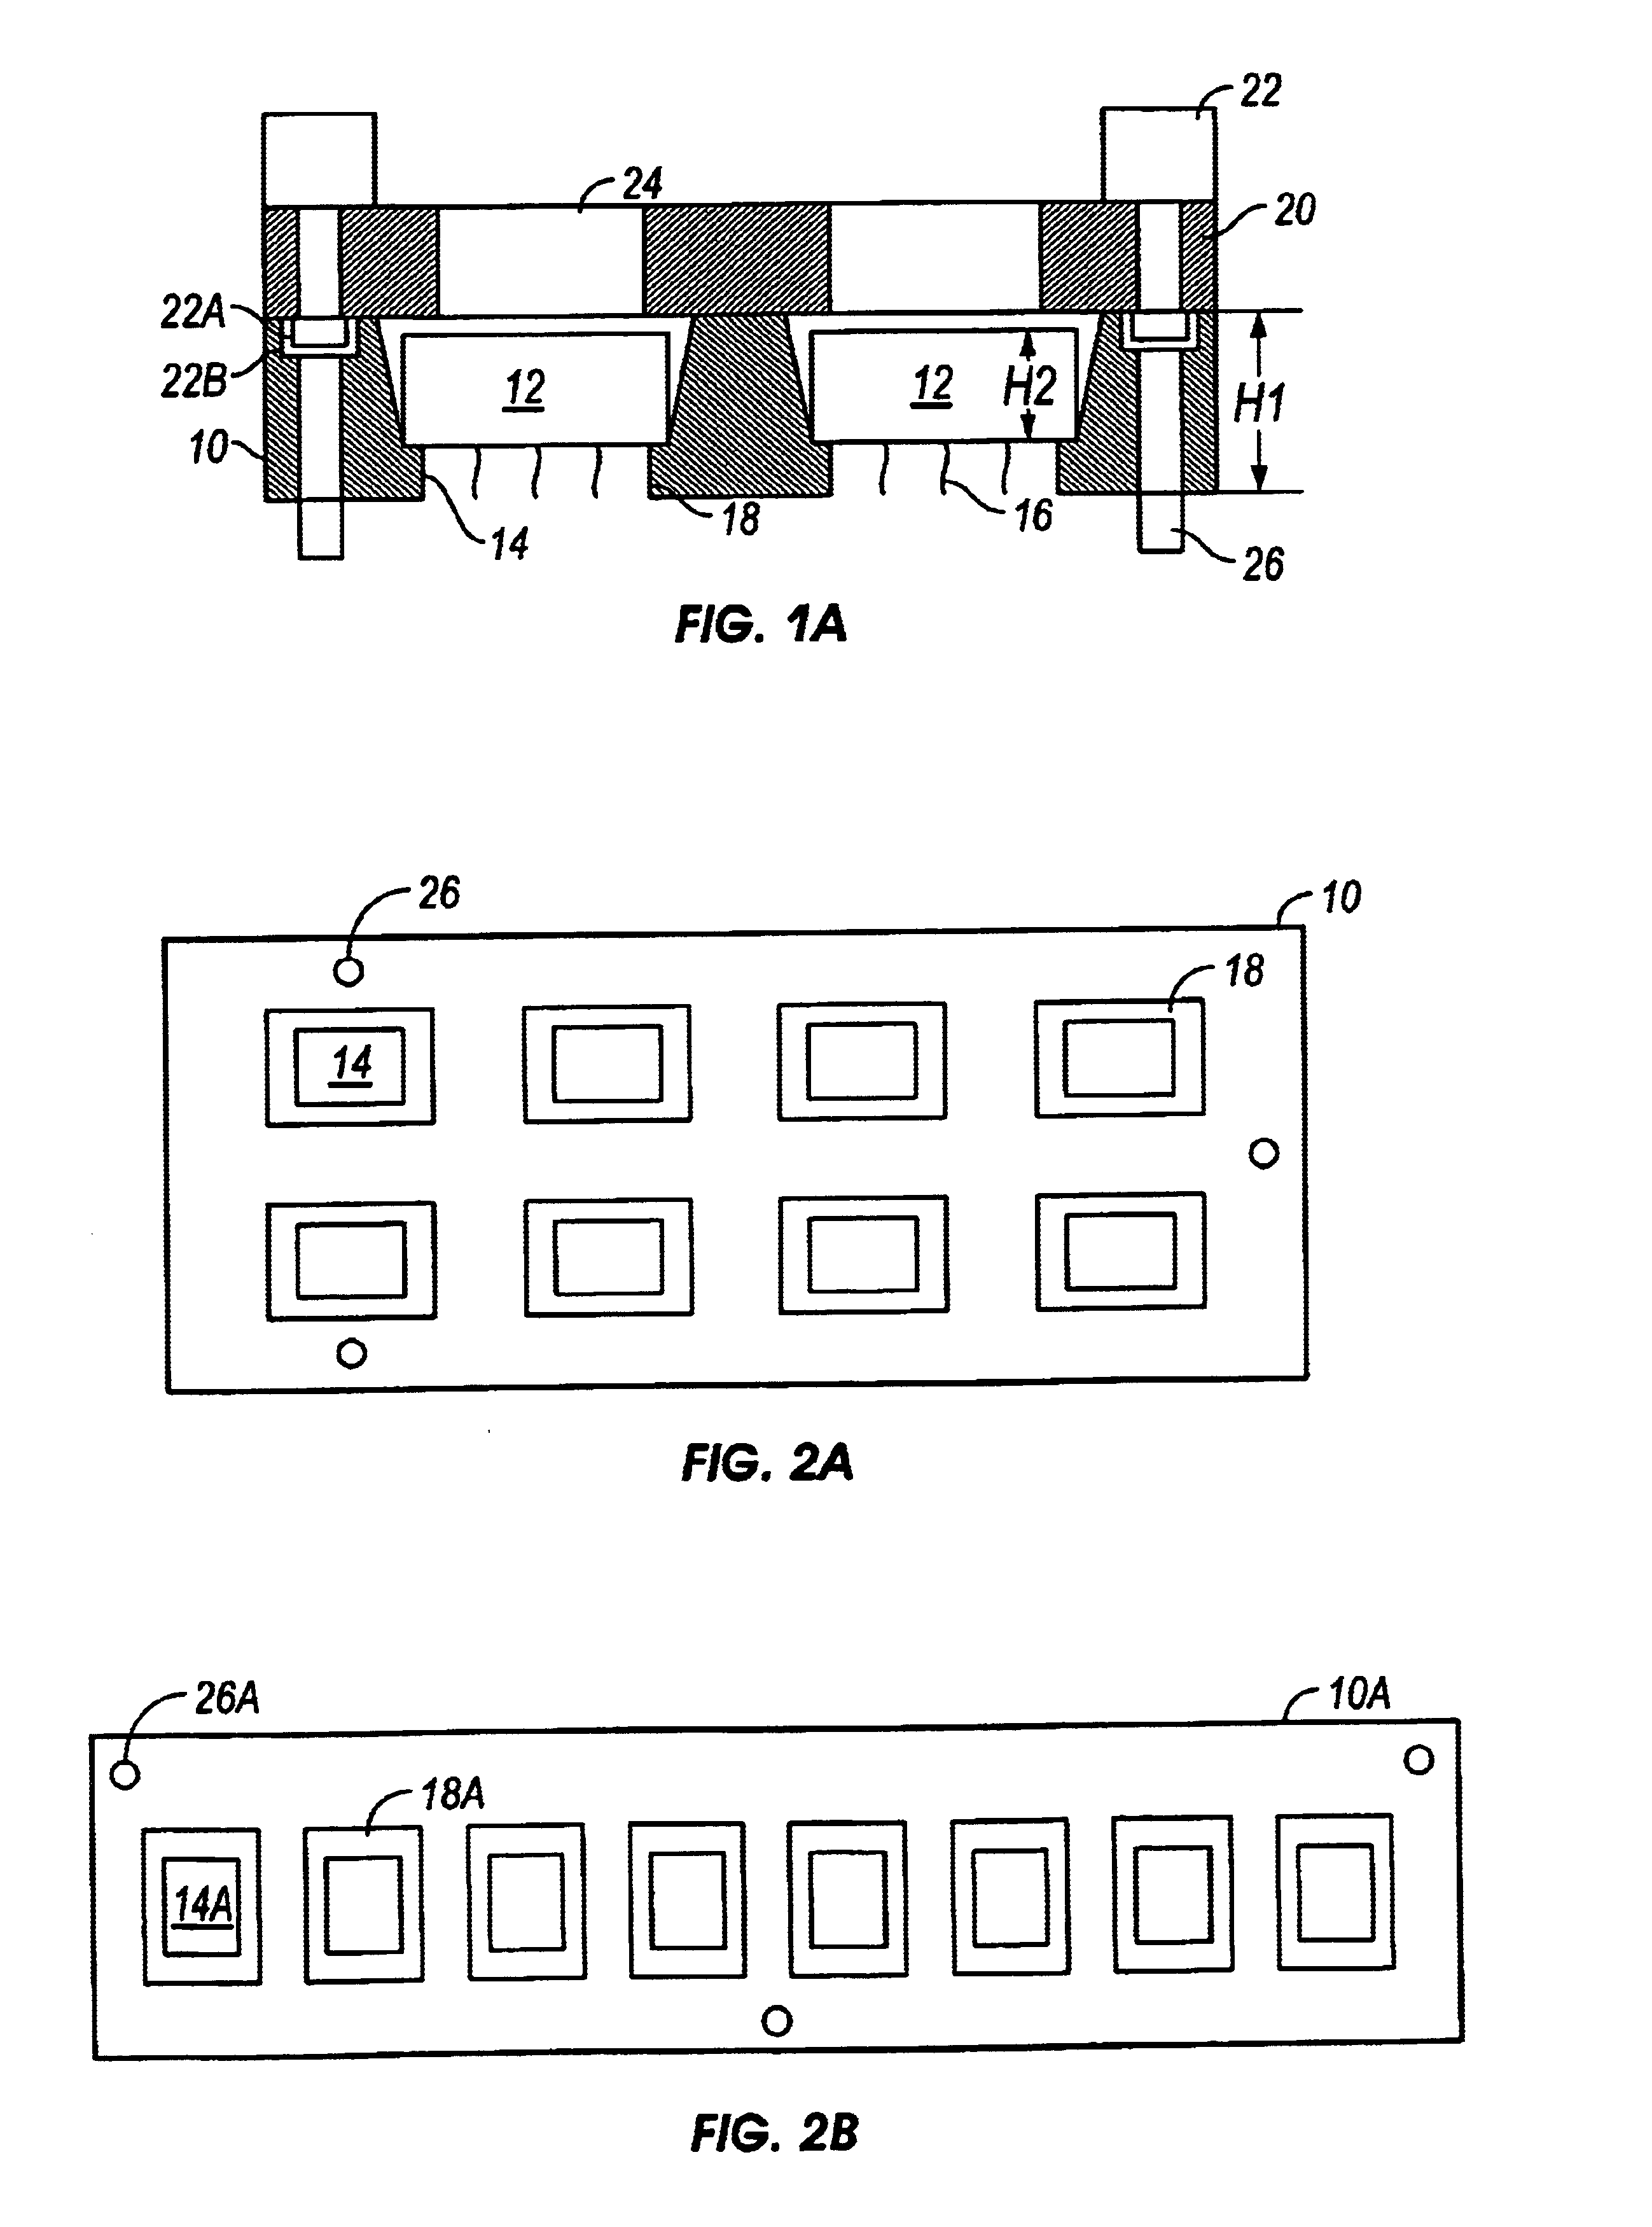 Method for processing an integrated circuit including placing dice into a carrier and testing